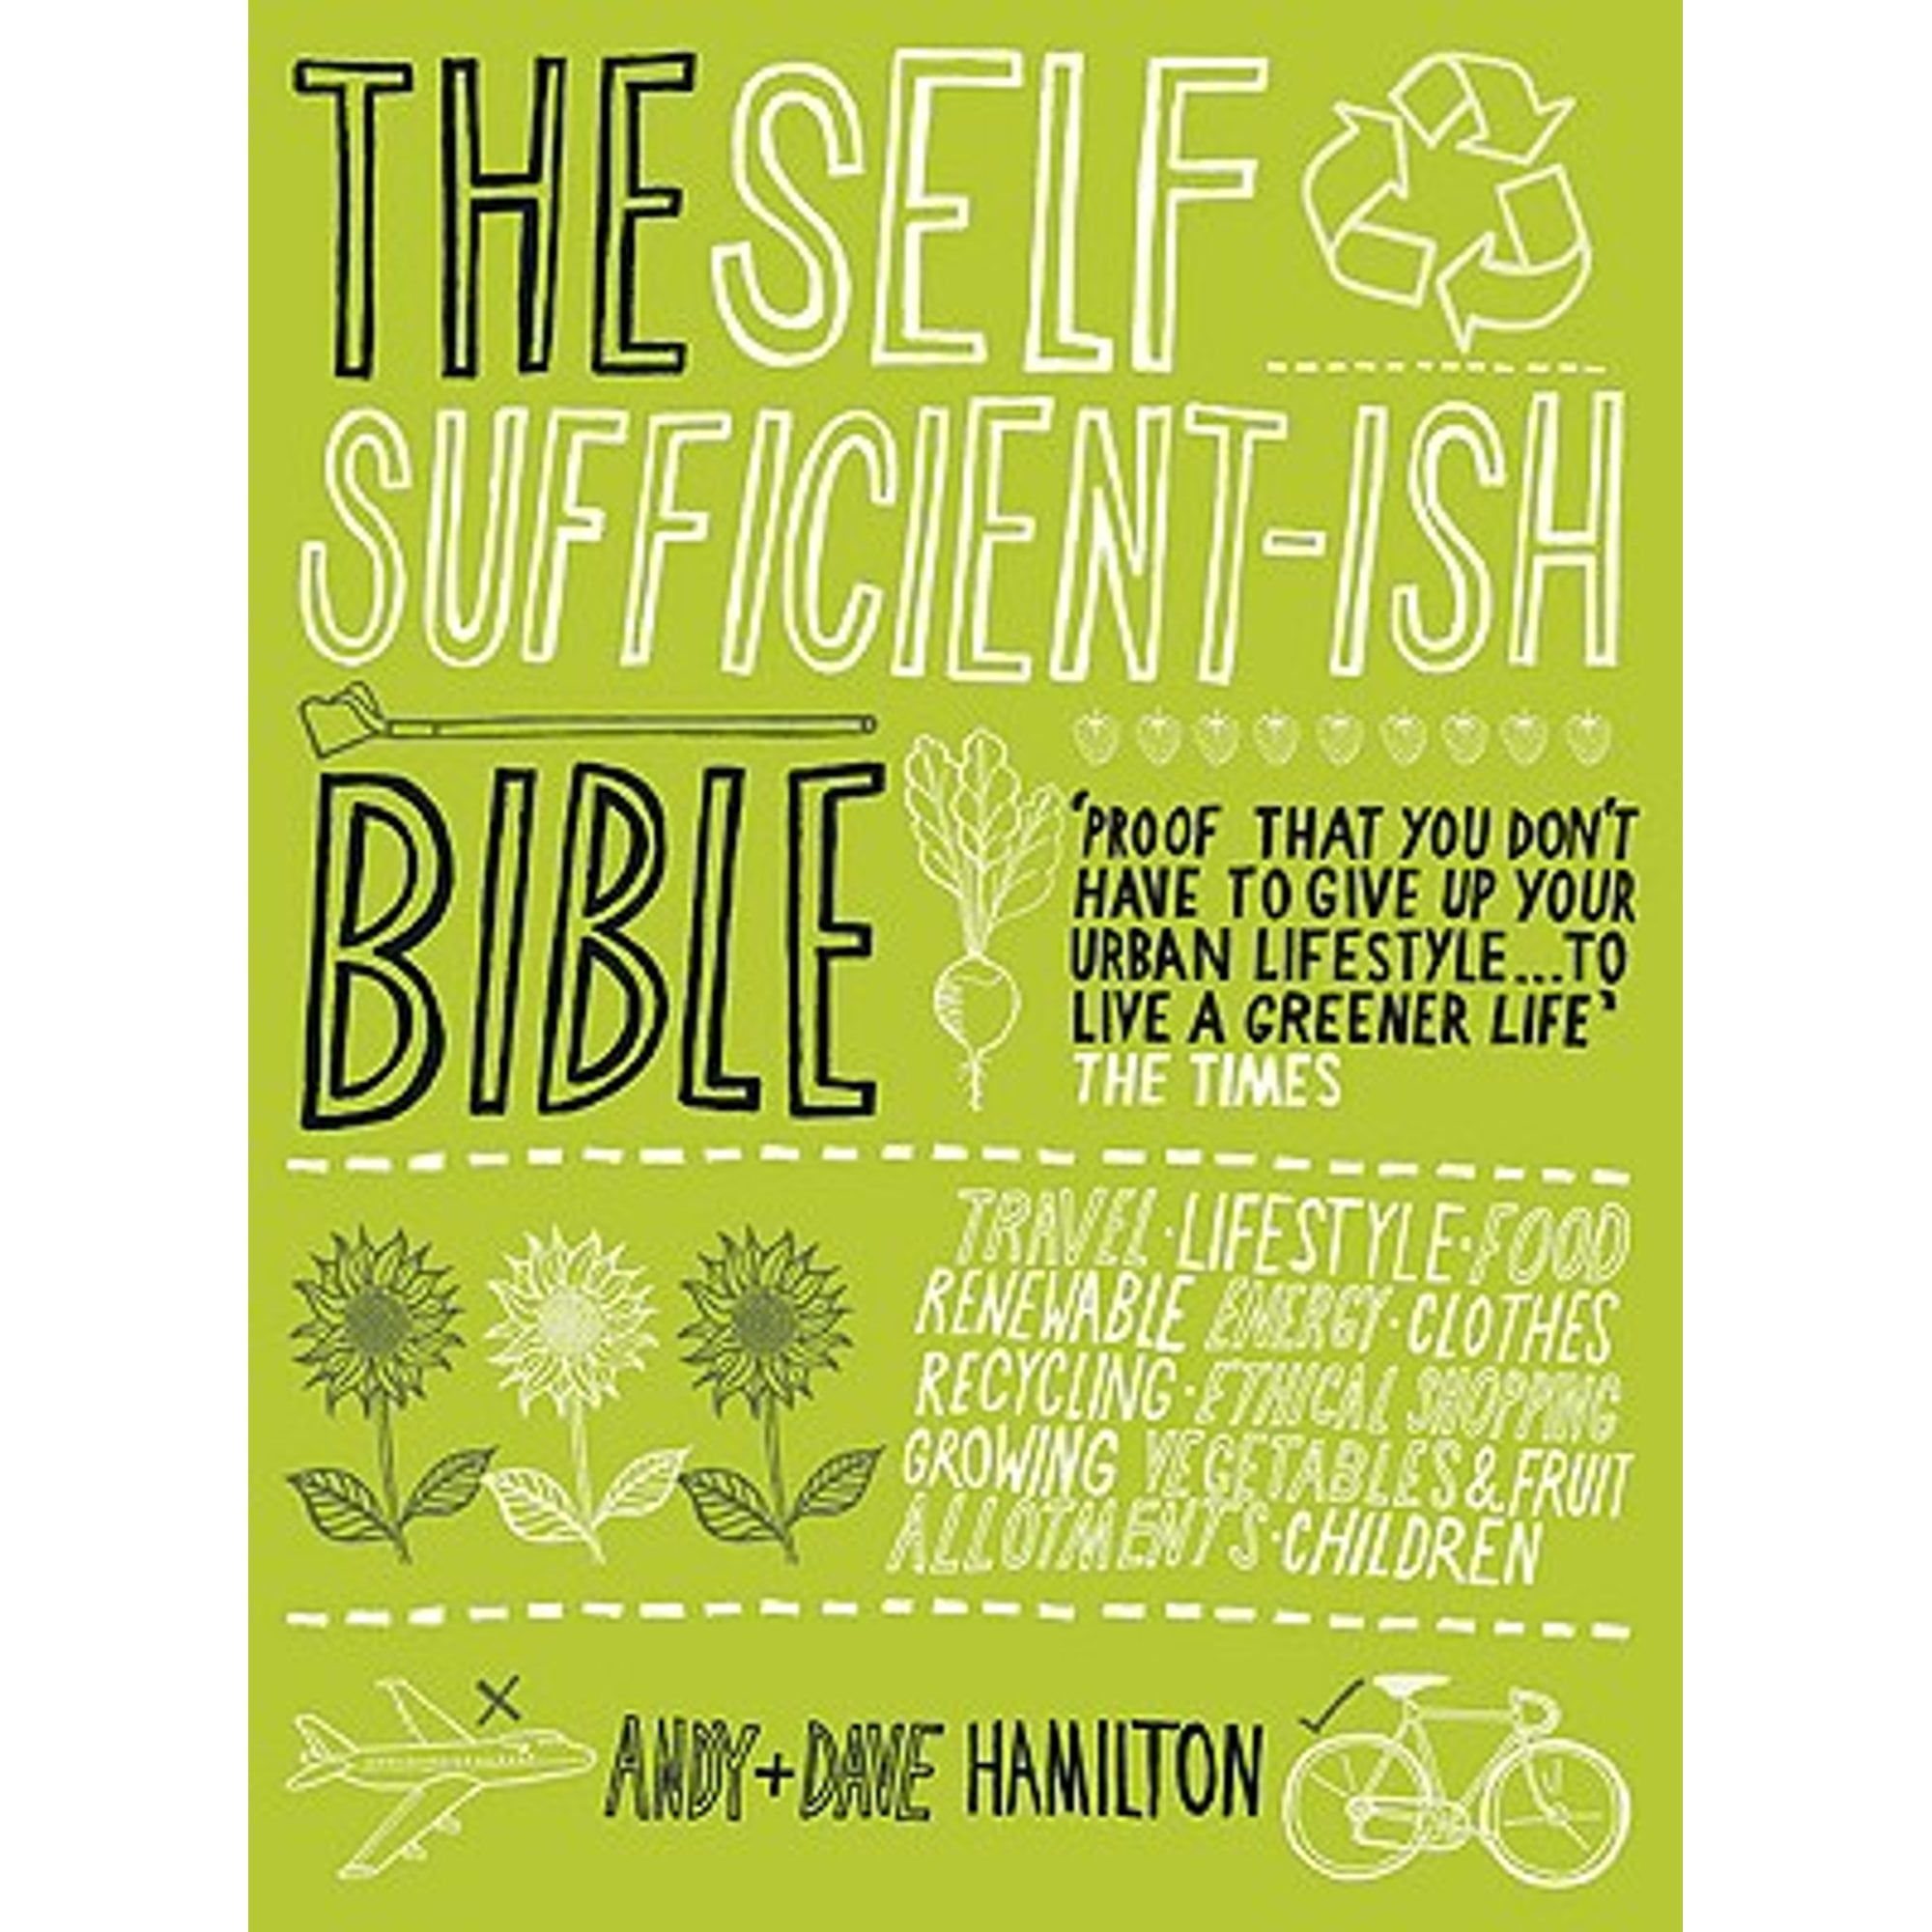 Pre-Owned The Self Sufficient-Ish Bible: An Eco-Living Guide for the 21st Century (Paperback 9780340951026) by Andy Hamilton, Dave Hamilton